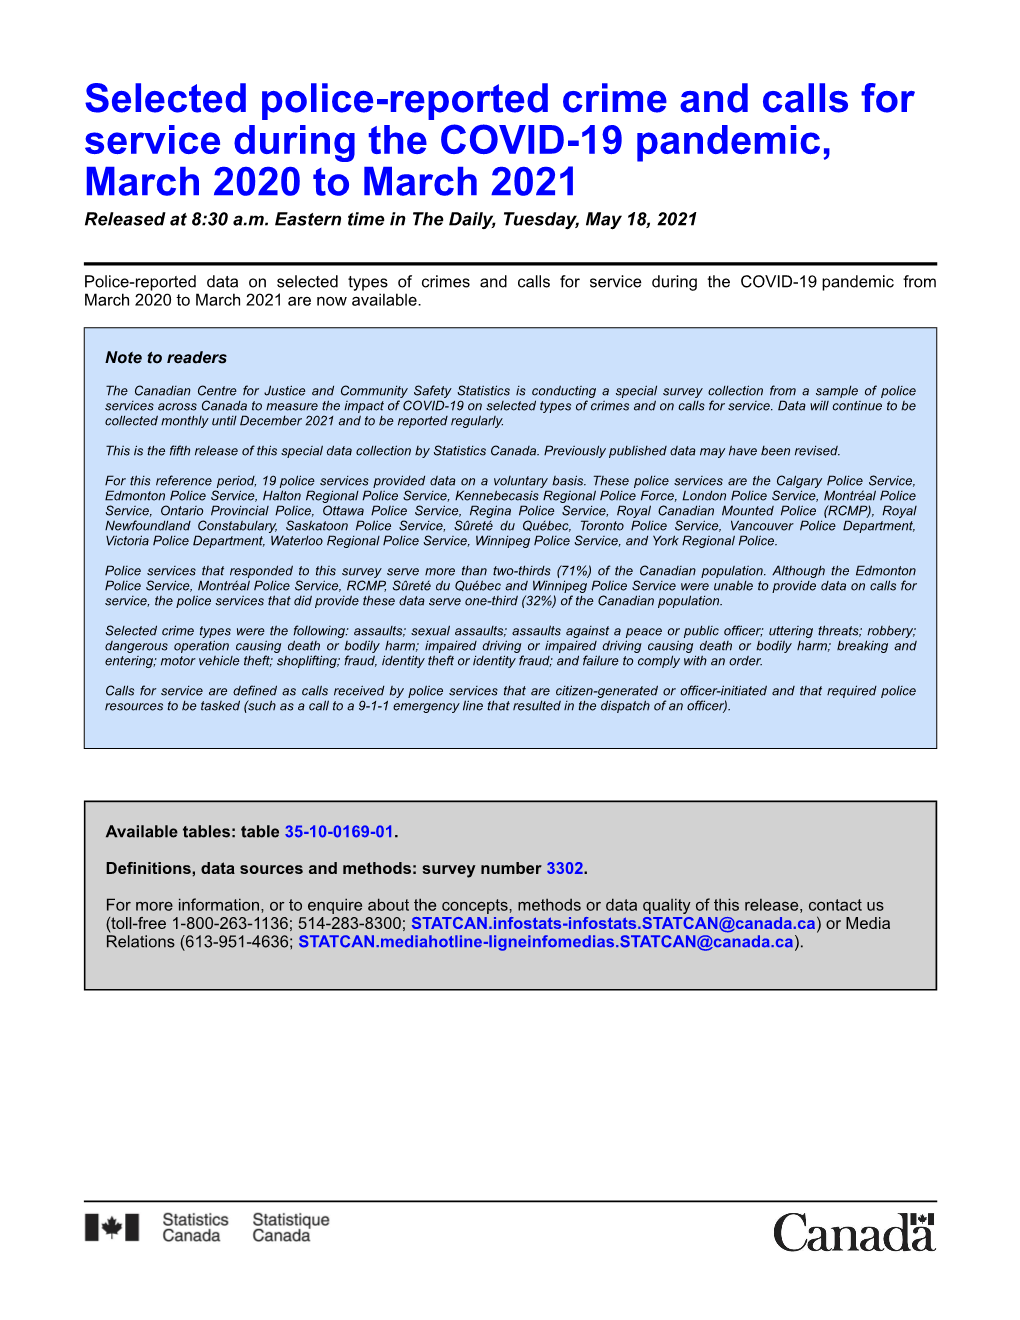 Selected Police-Reported Crime and Calls for Service During the COVID-19 Pandemic, March 2020 to March 2021 Released at 8:30 A.M